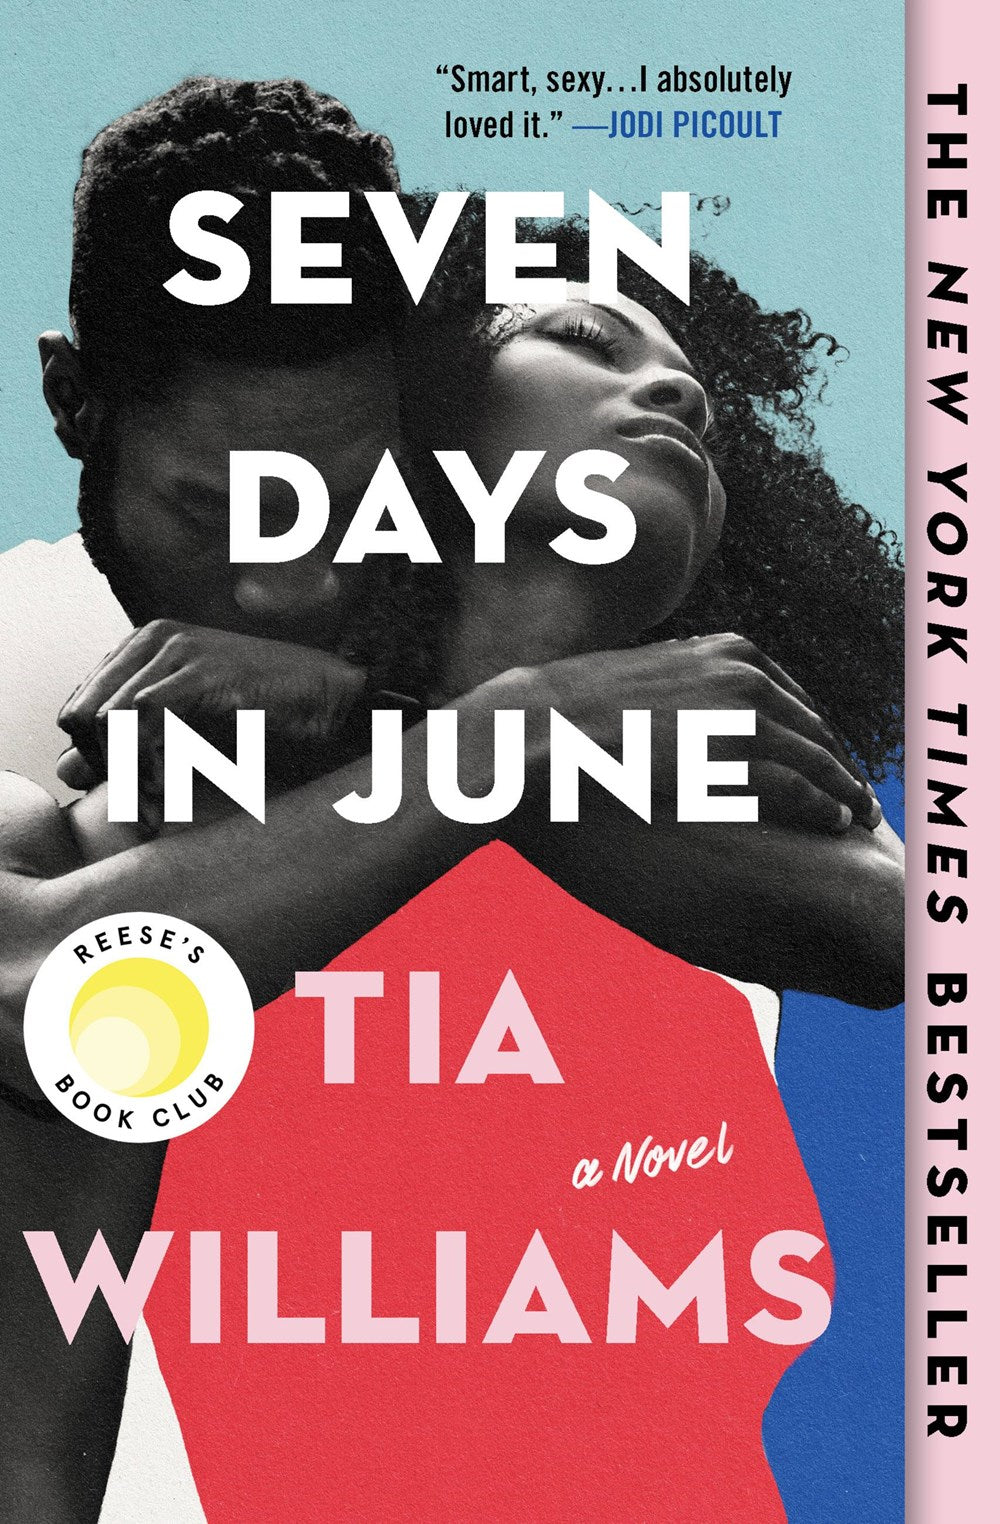 Seven Days in June by Tia Williams (Paperback)